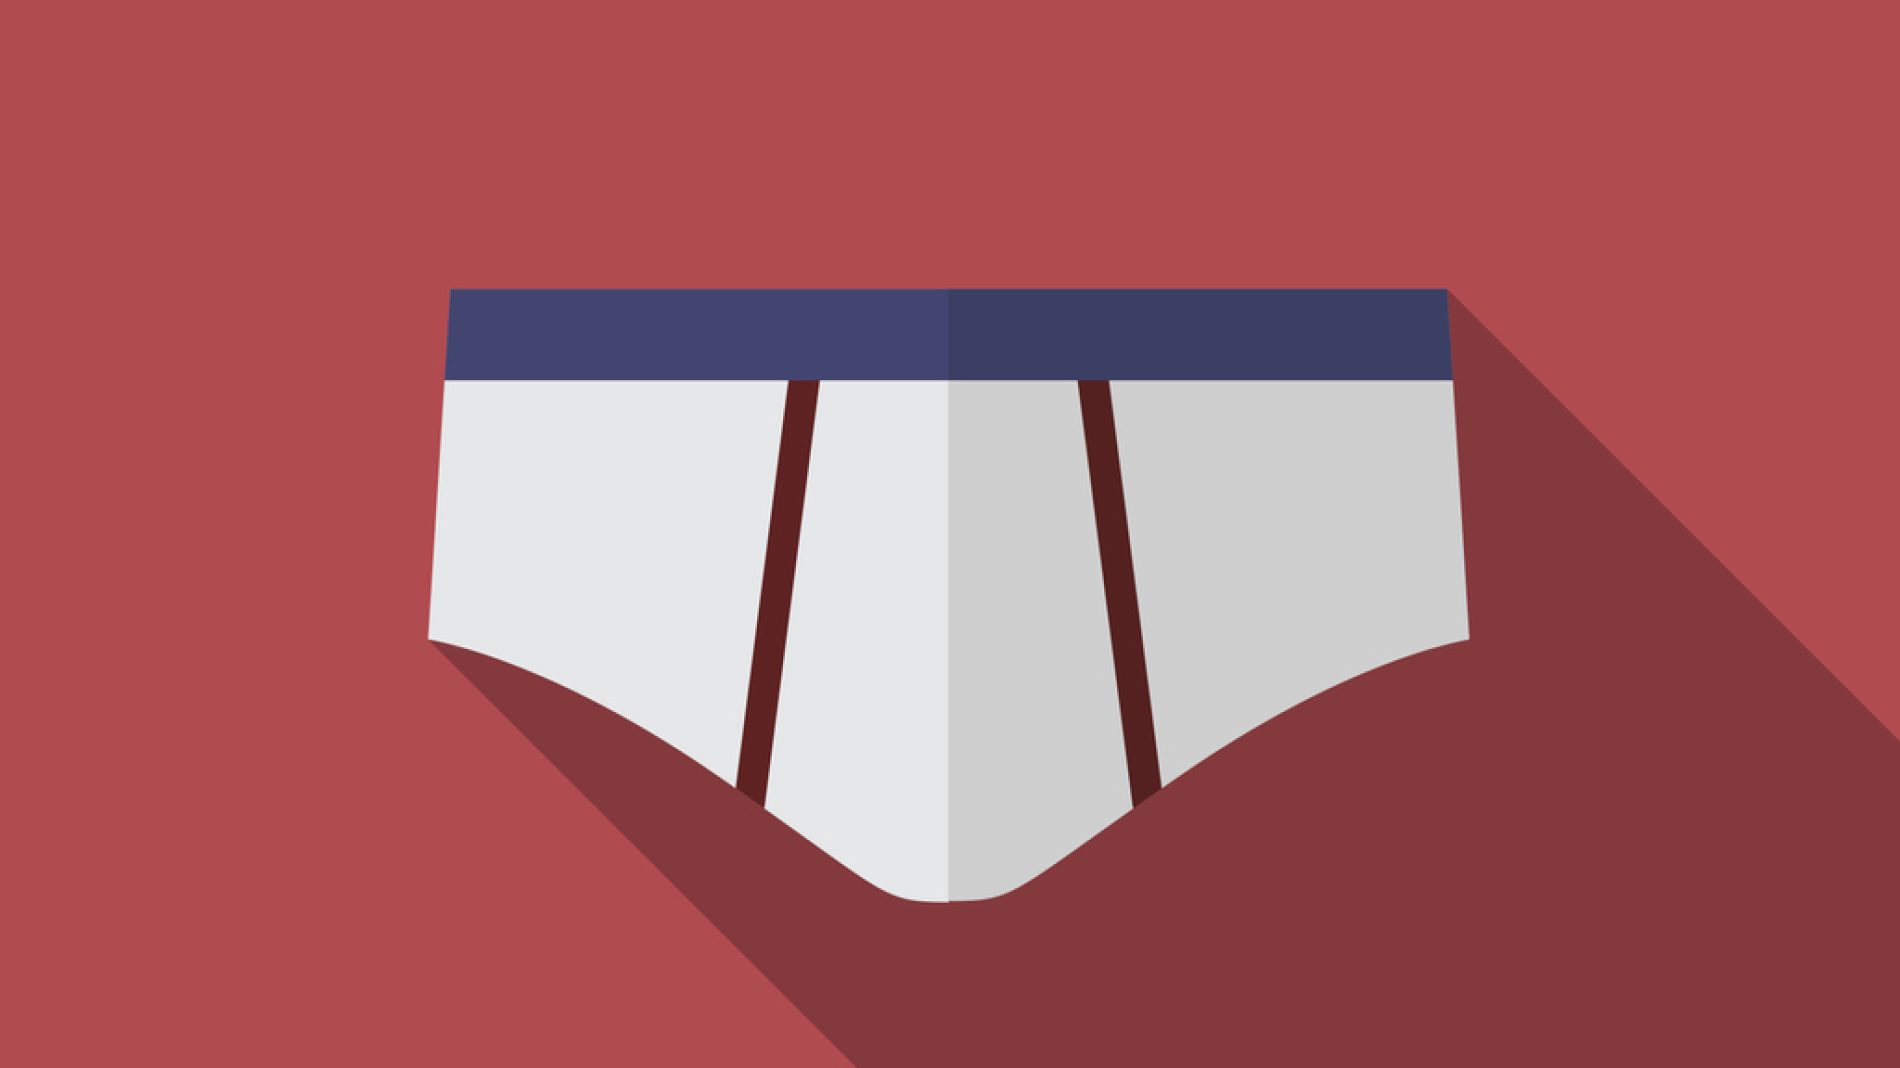 Underwear for man flat icon illustration isolated vector sign symbol